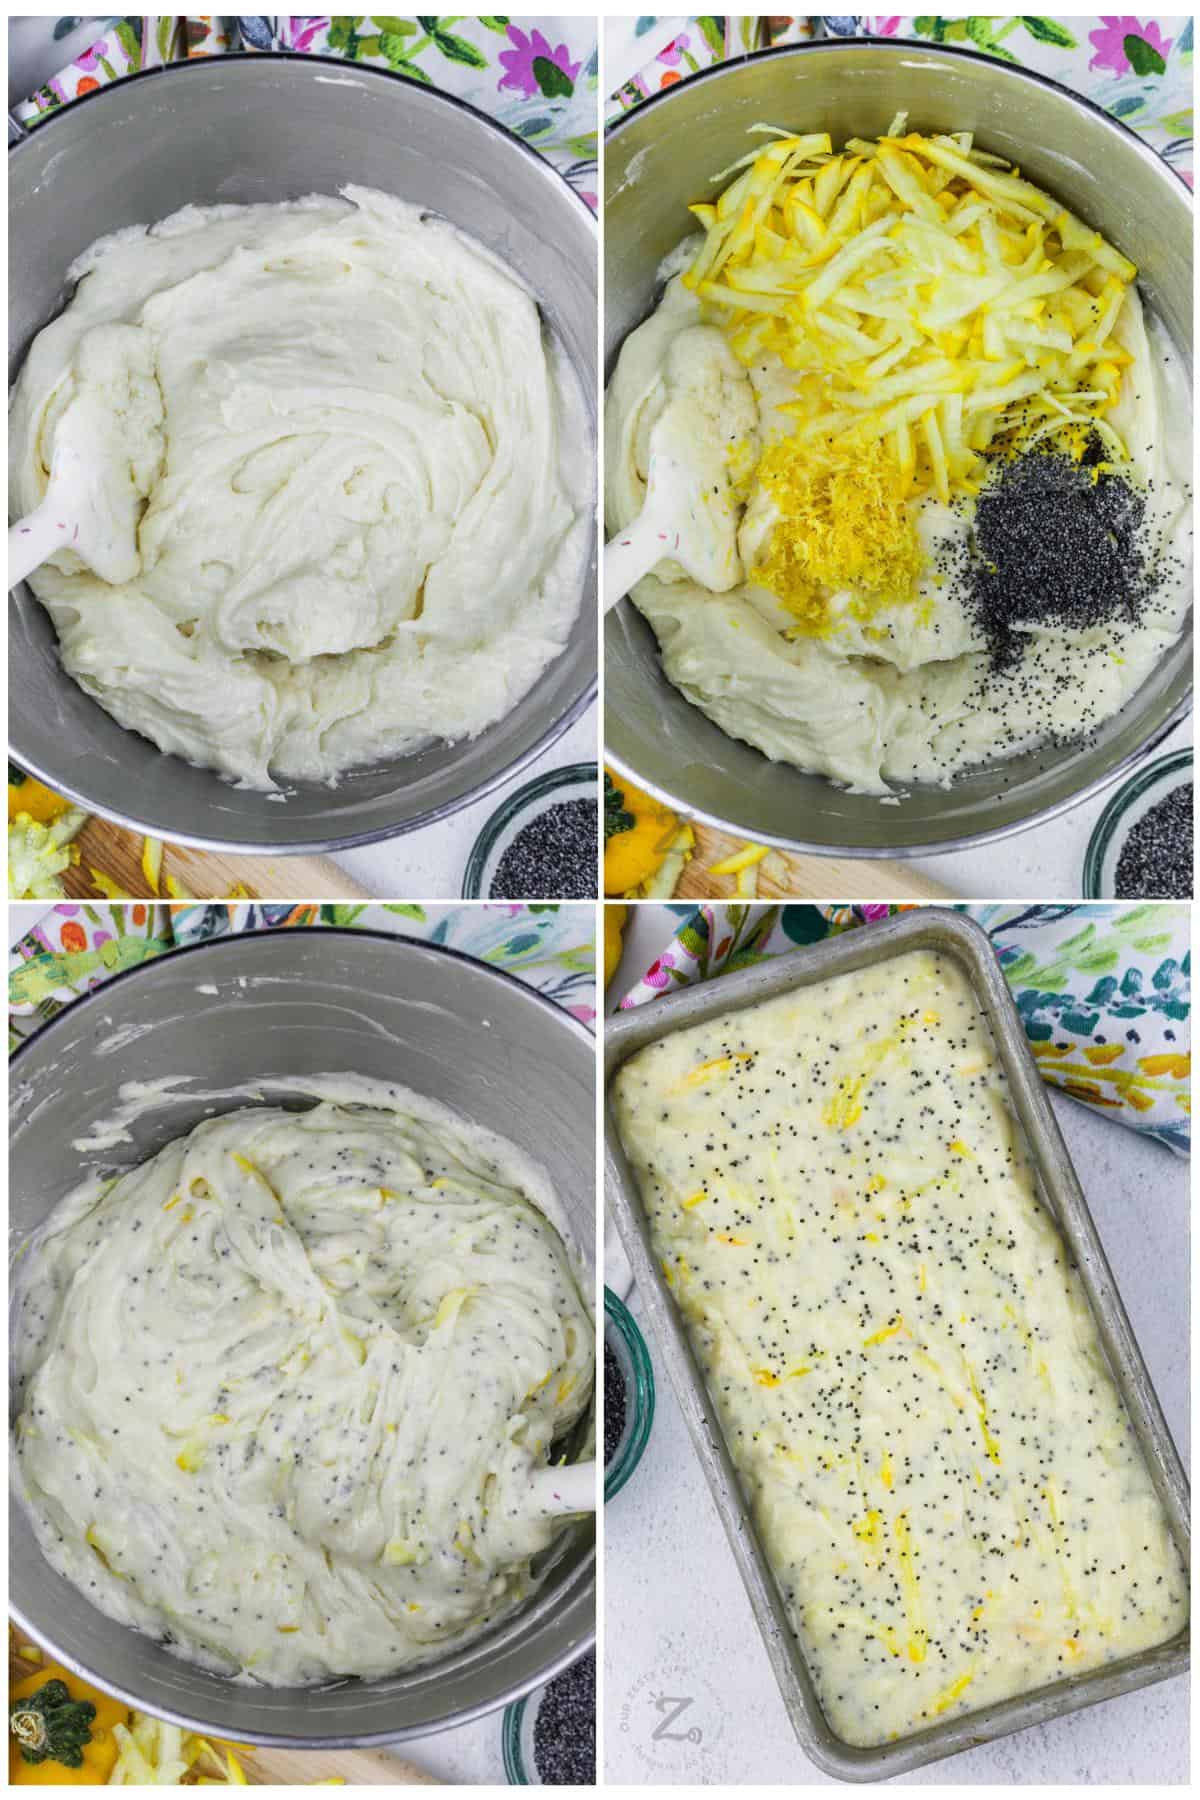 process of adding ingredients togeher to make Lemon Zucchini Bread